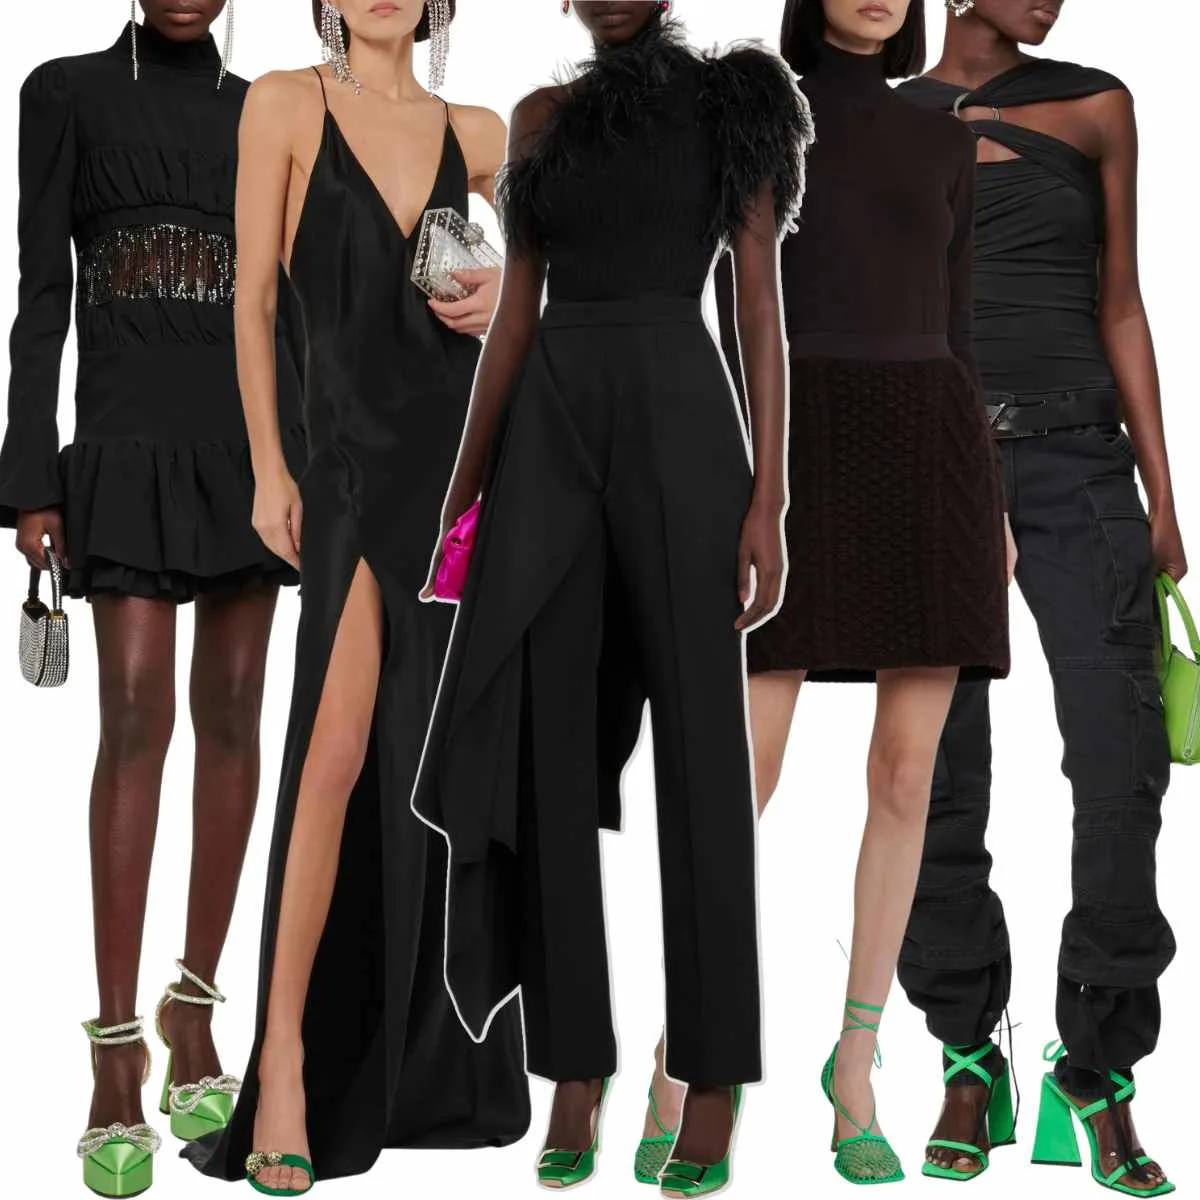 Collage of 5 women wearing different green shoes outfits with black clothing.